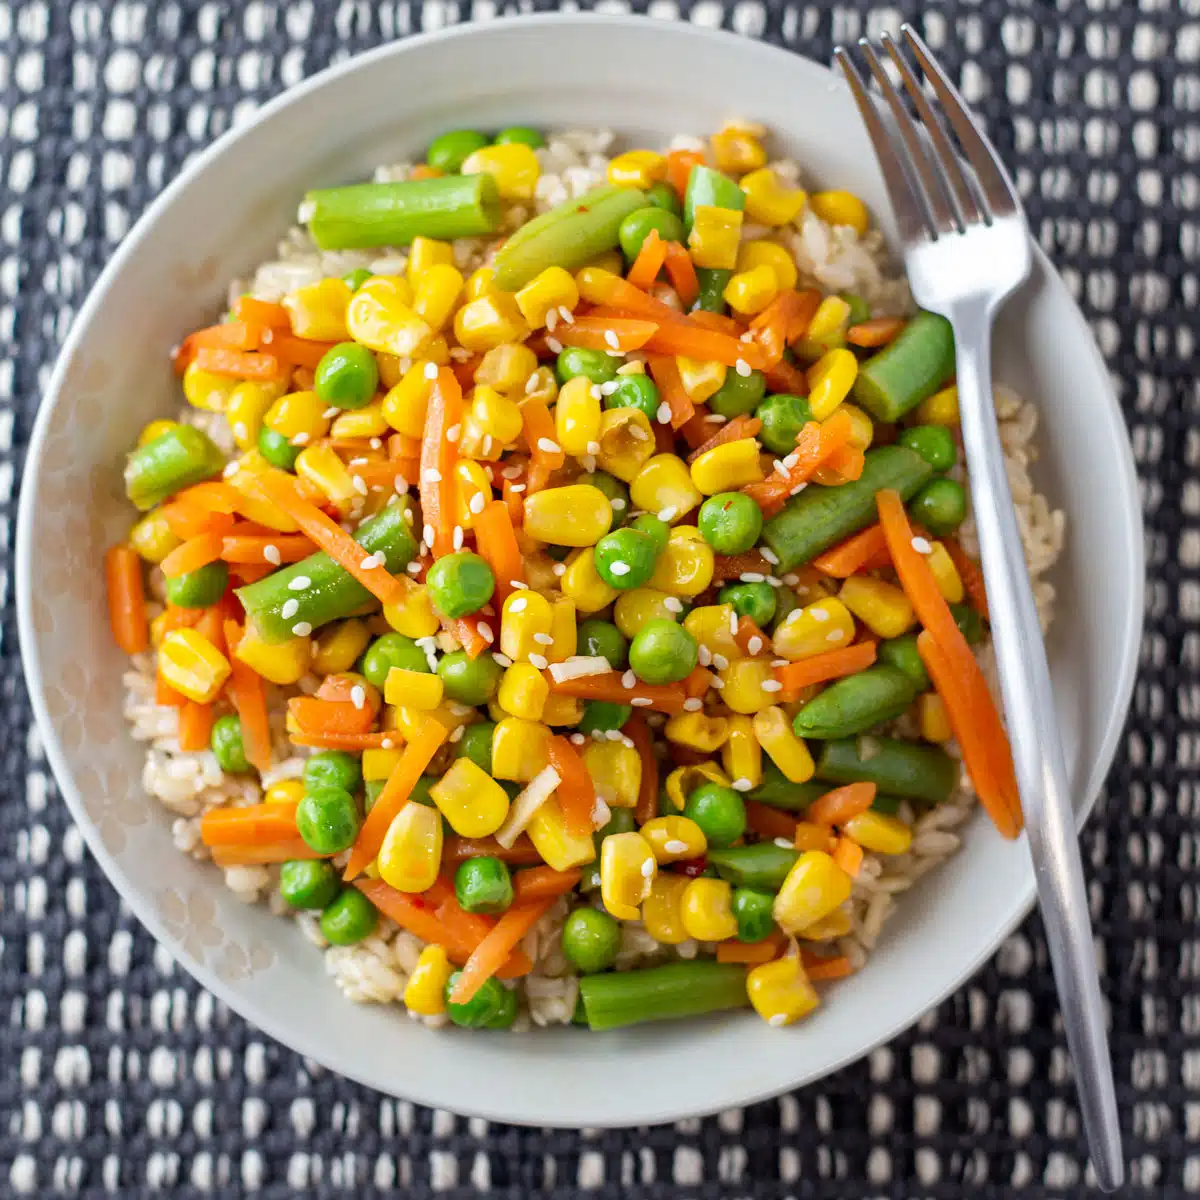 Square image of frozen veggie stir fry on a plate.